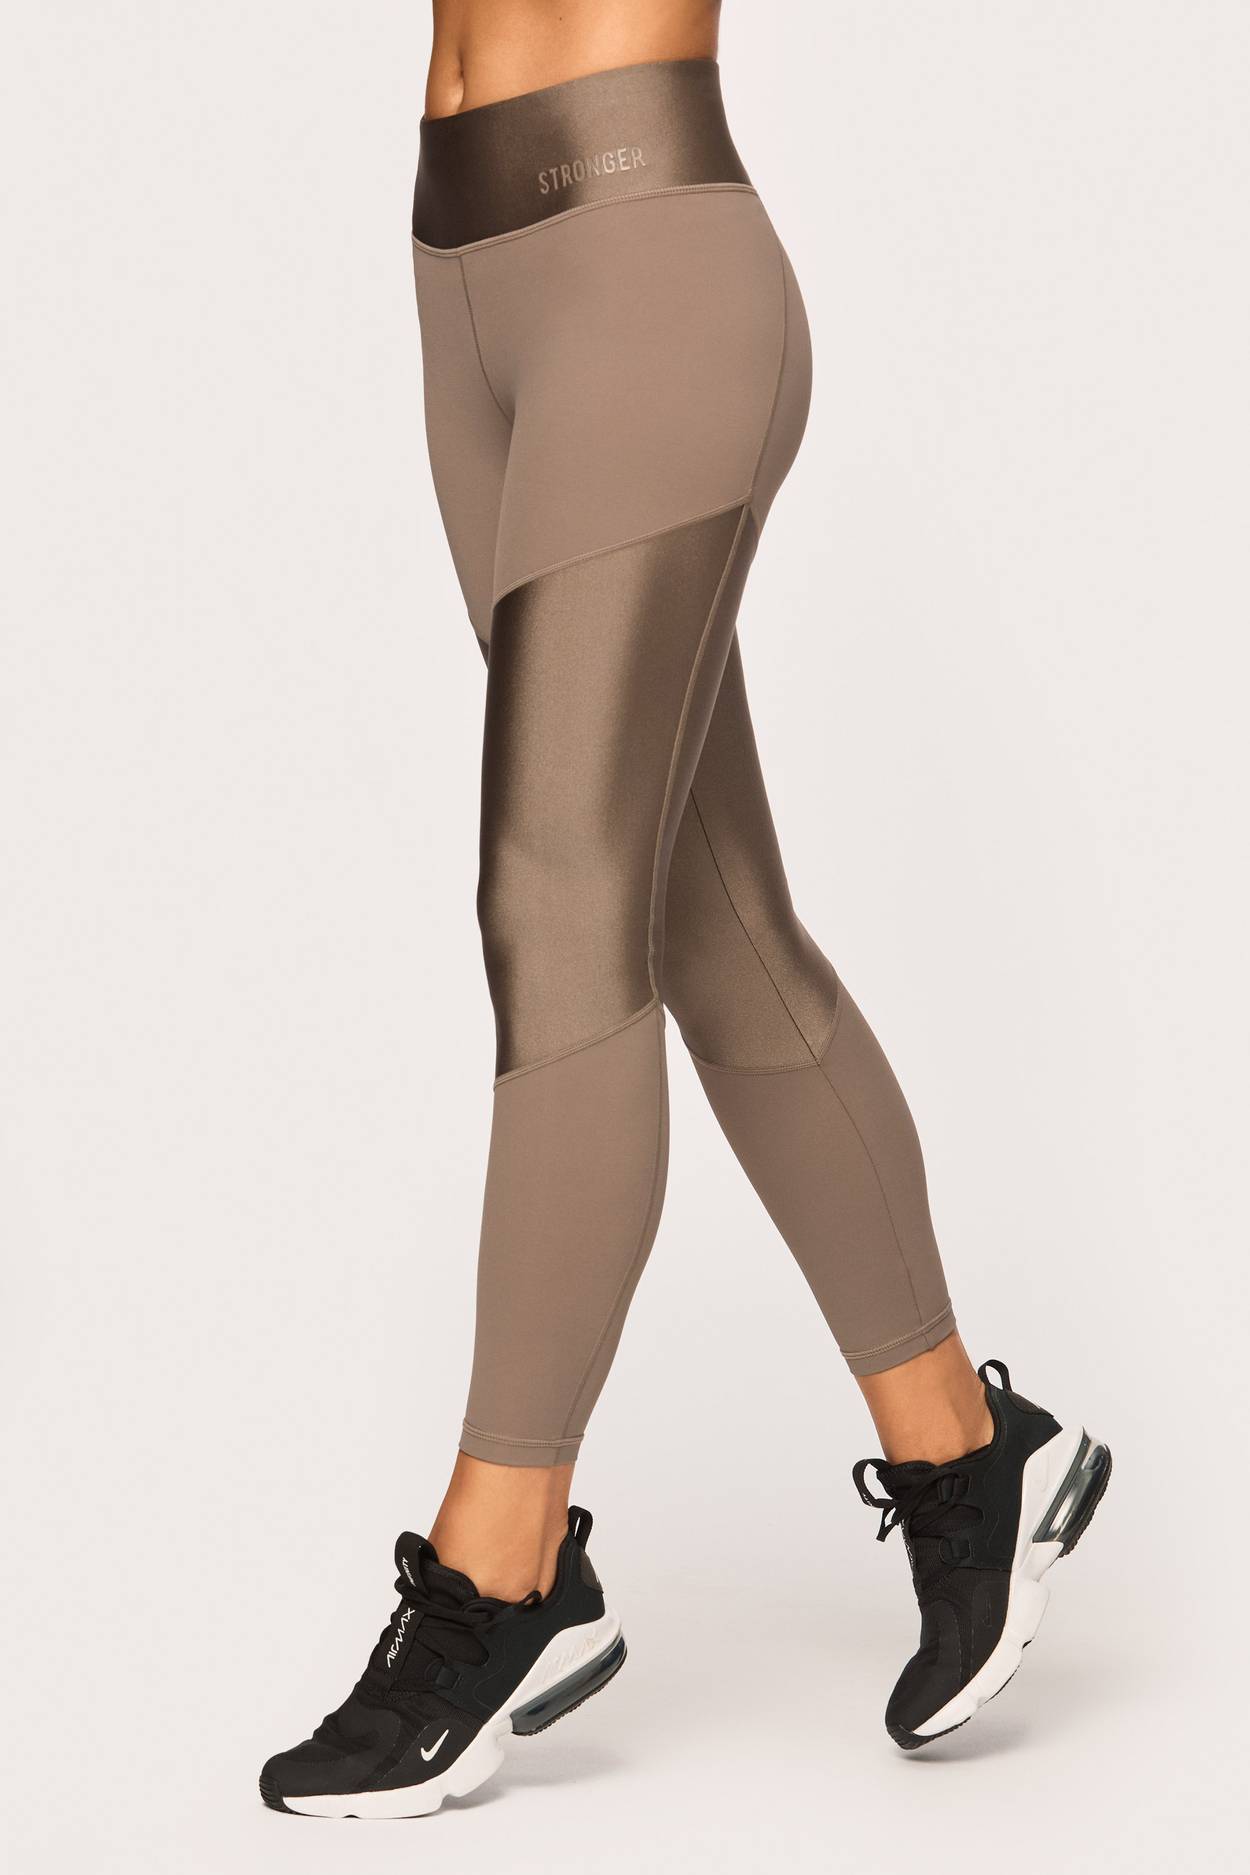 These Leggings Are Totally 'Squat-Proof' and on Sale at